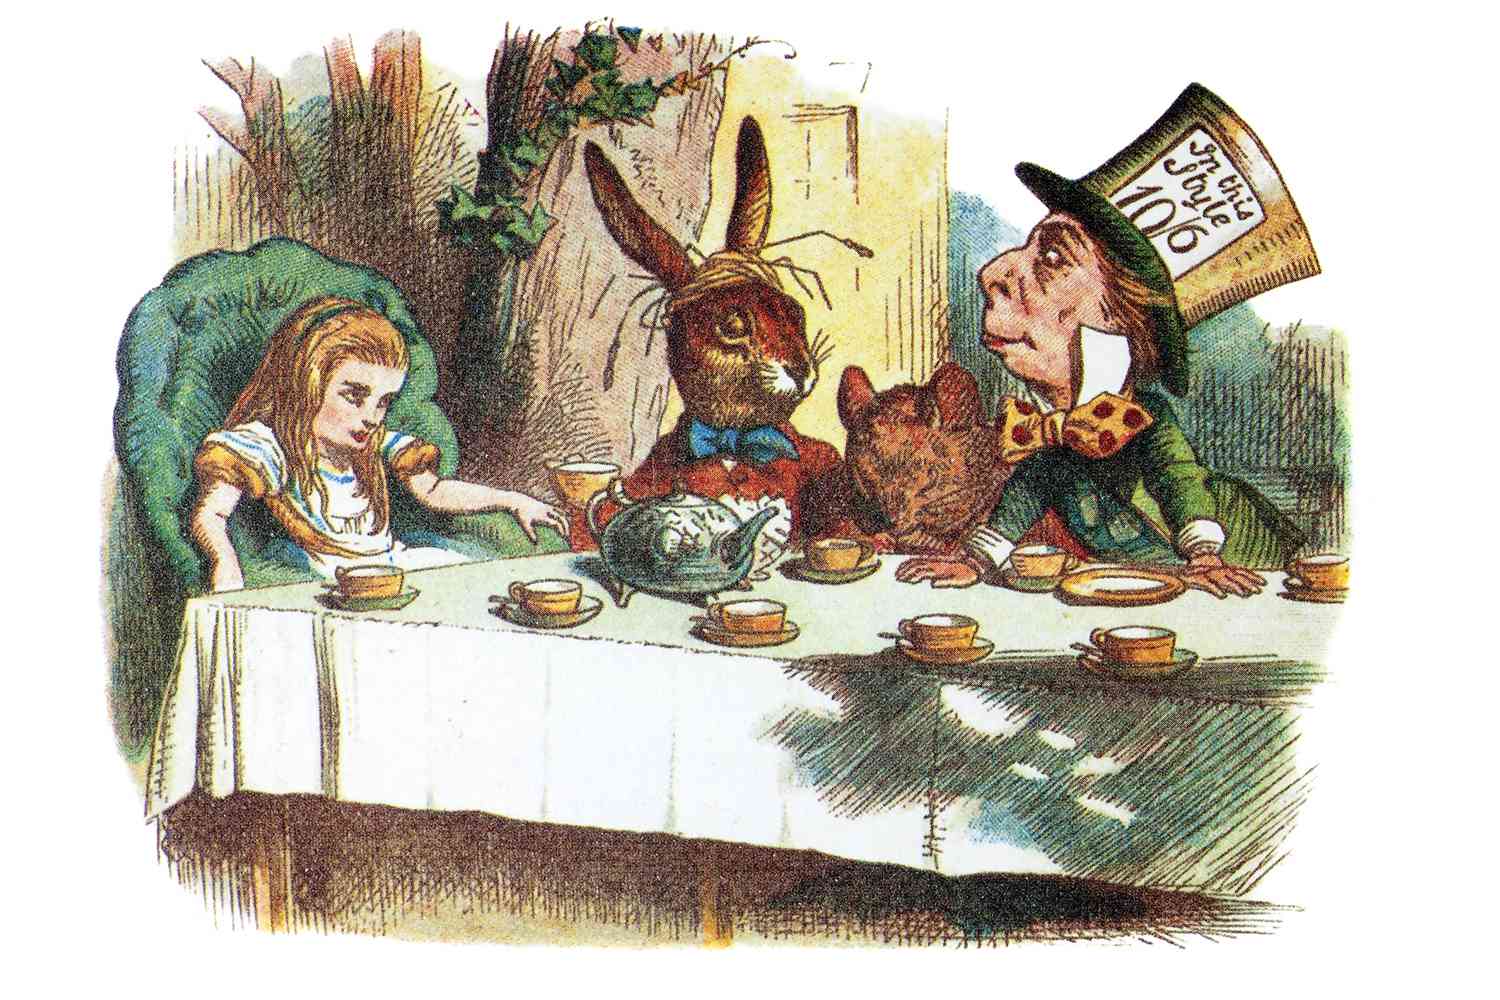 Illustration of the Mad Hatter's tea party from Alice's Adventures in Wonderland